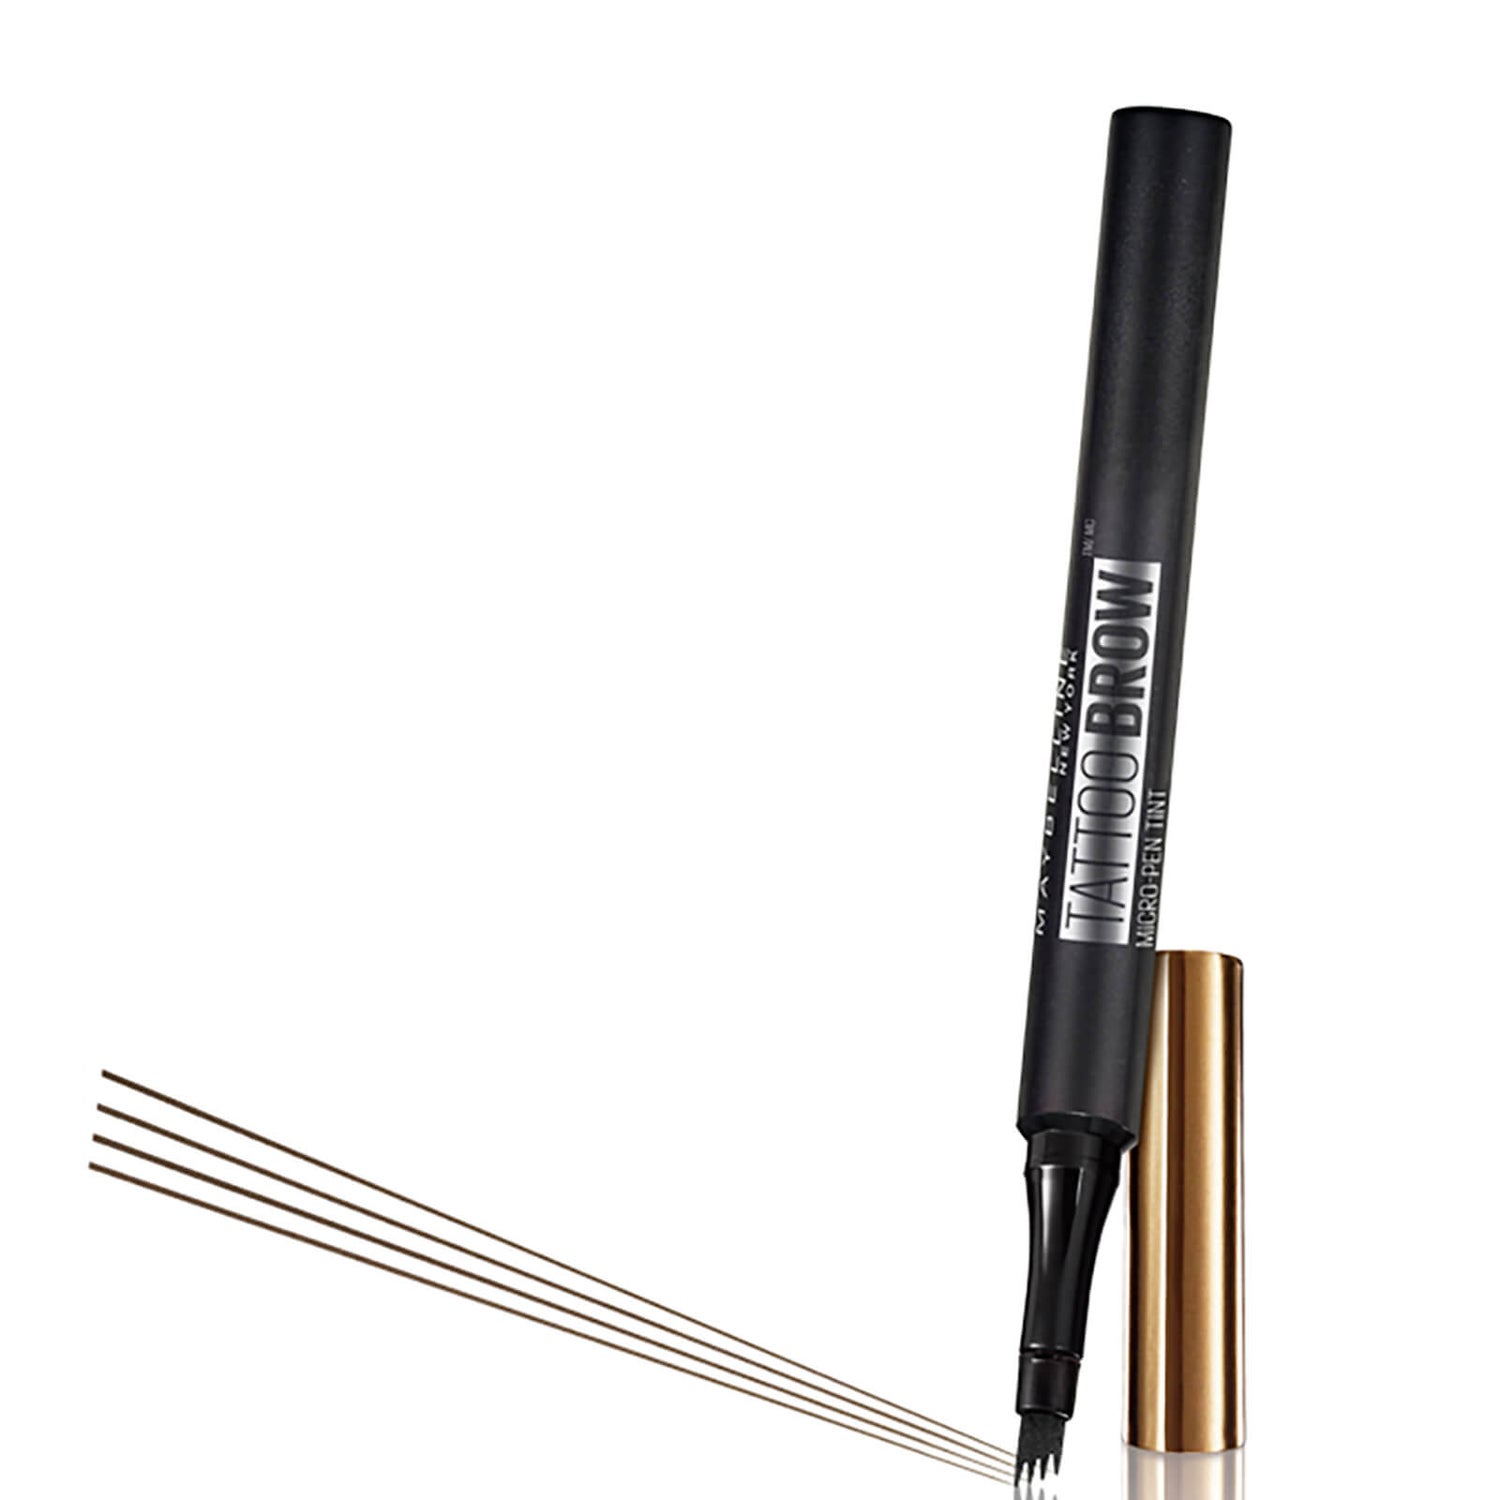 Maybelline Tattoo Brow Microblade Ink Pen